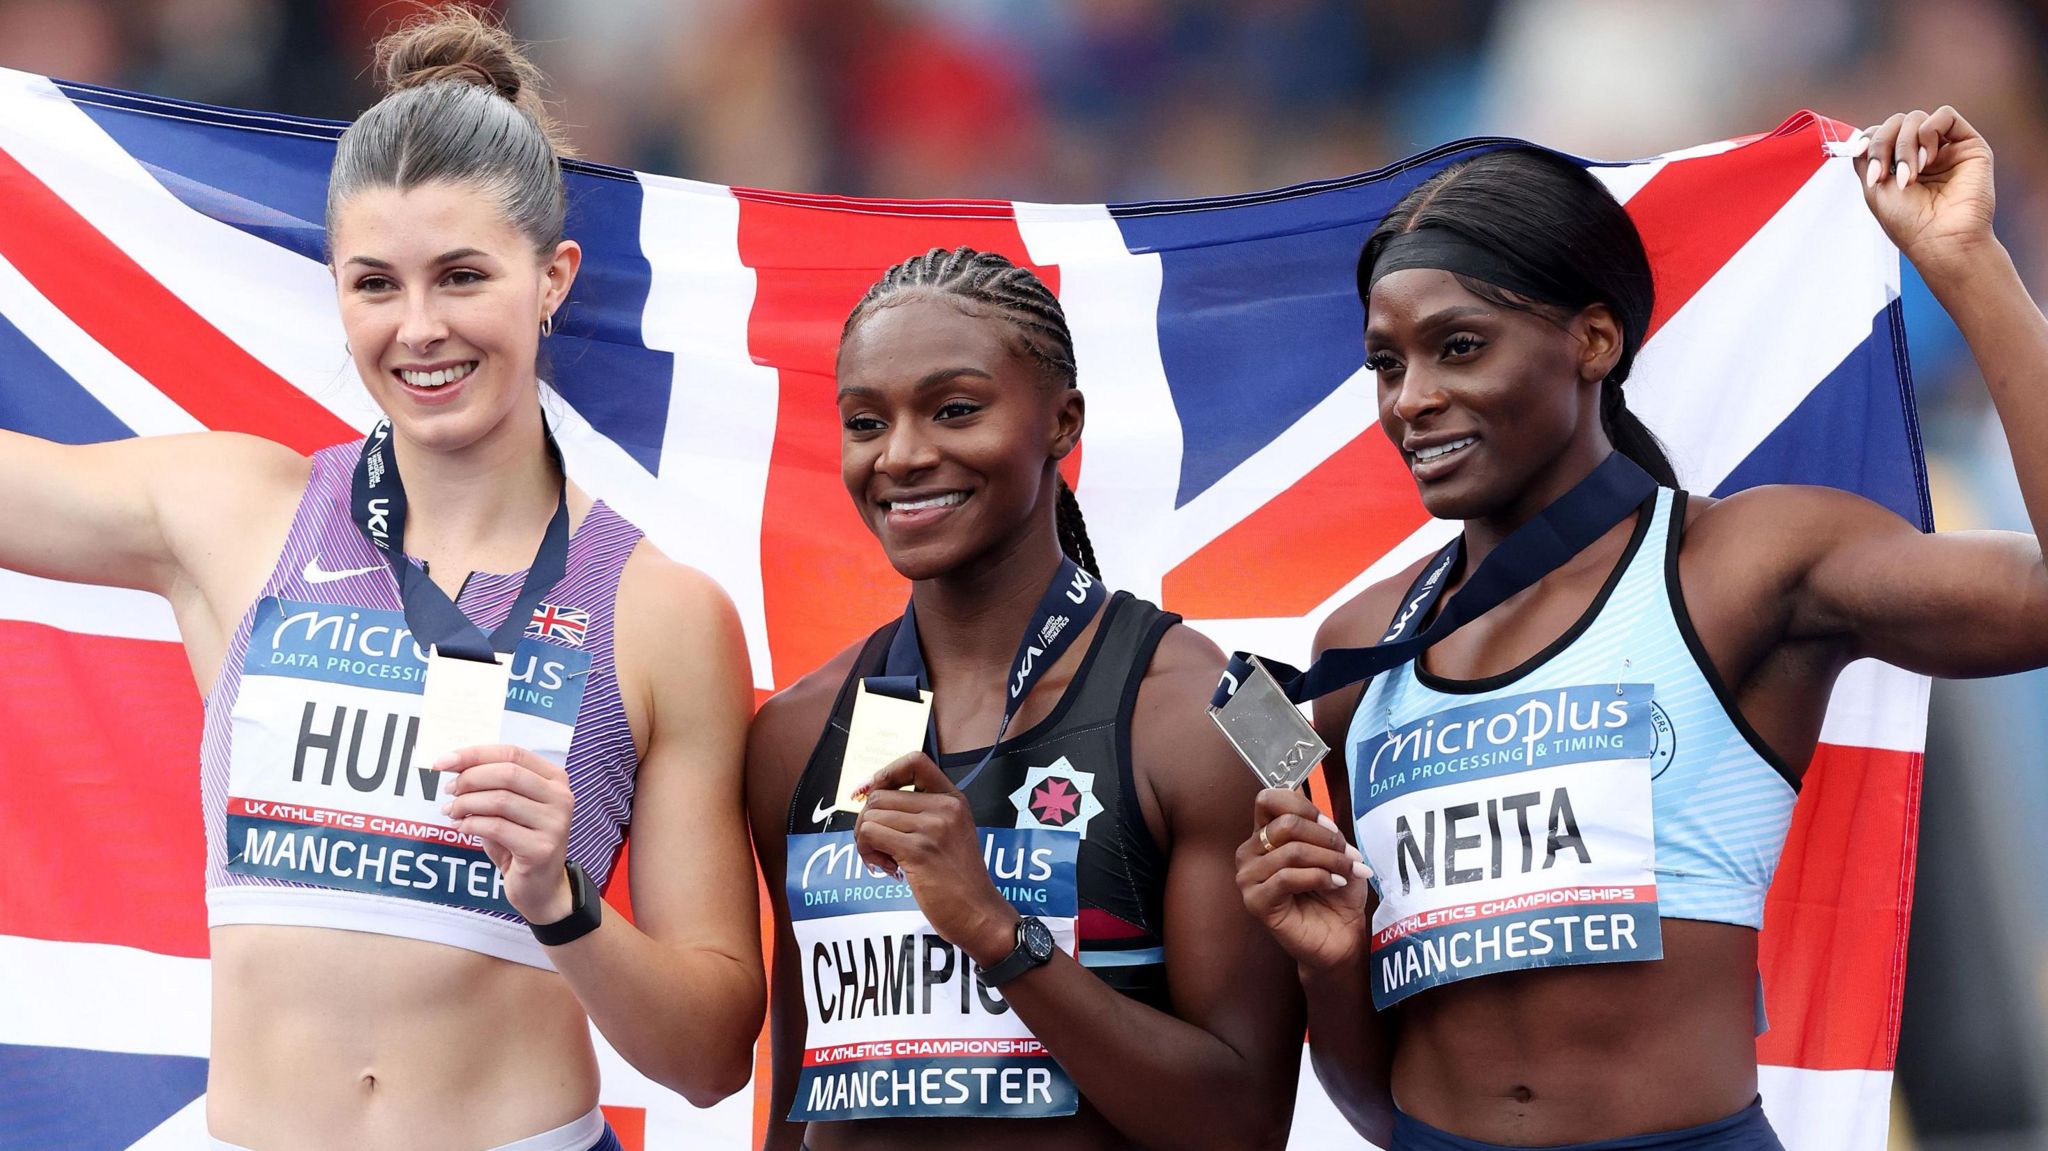 Dina Asher-Smith wins the UK 200m title